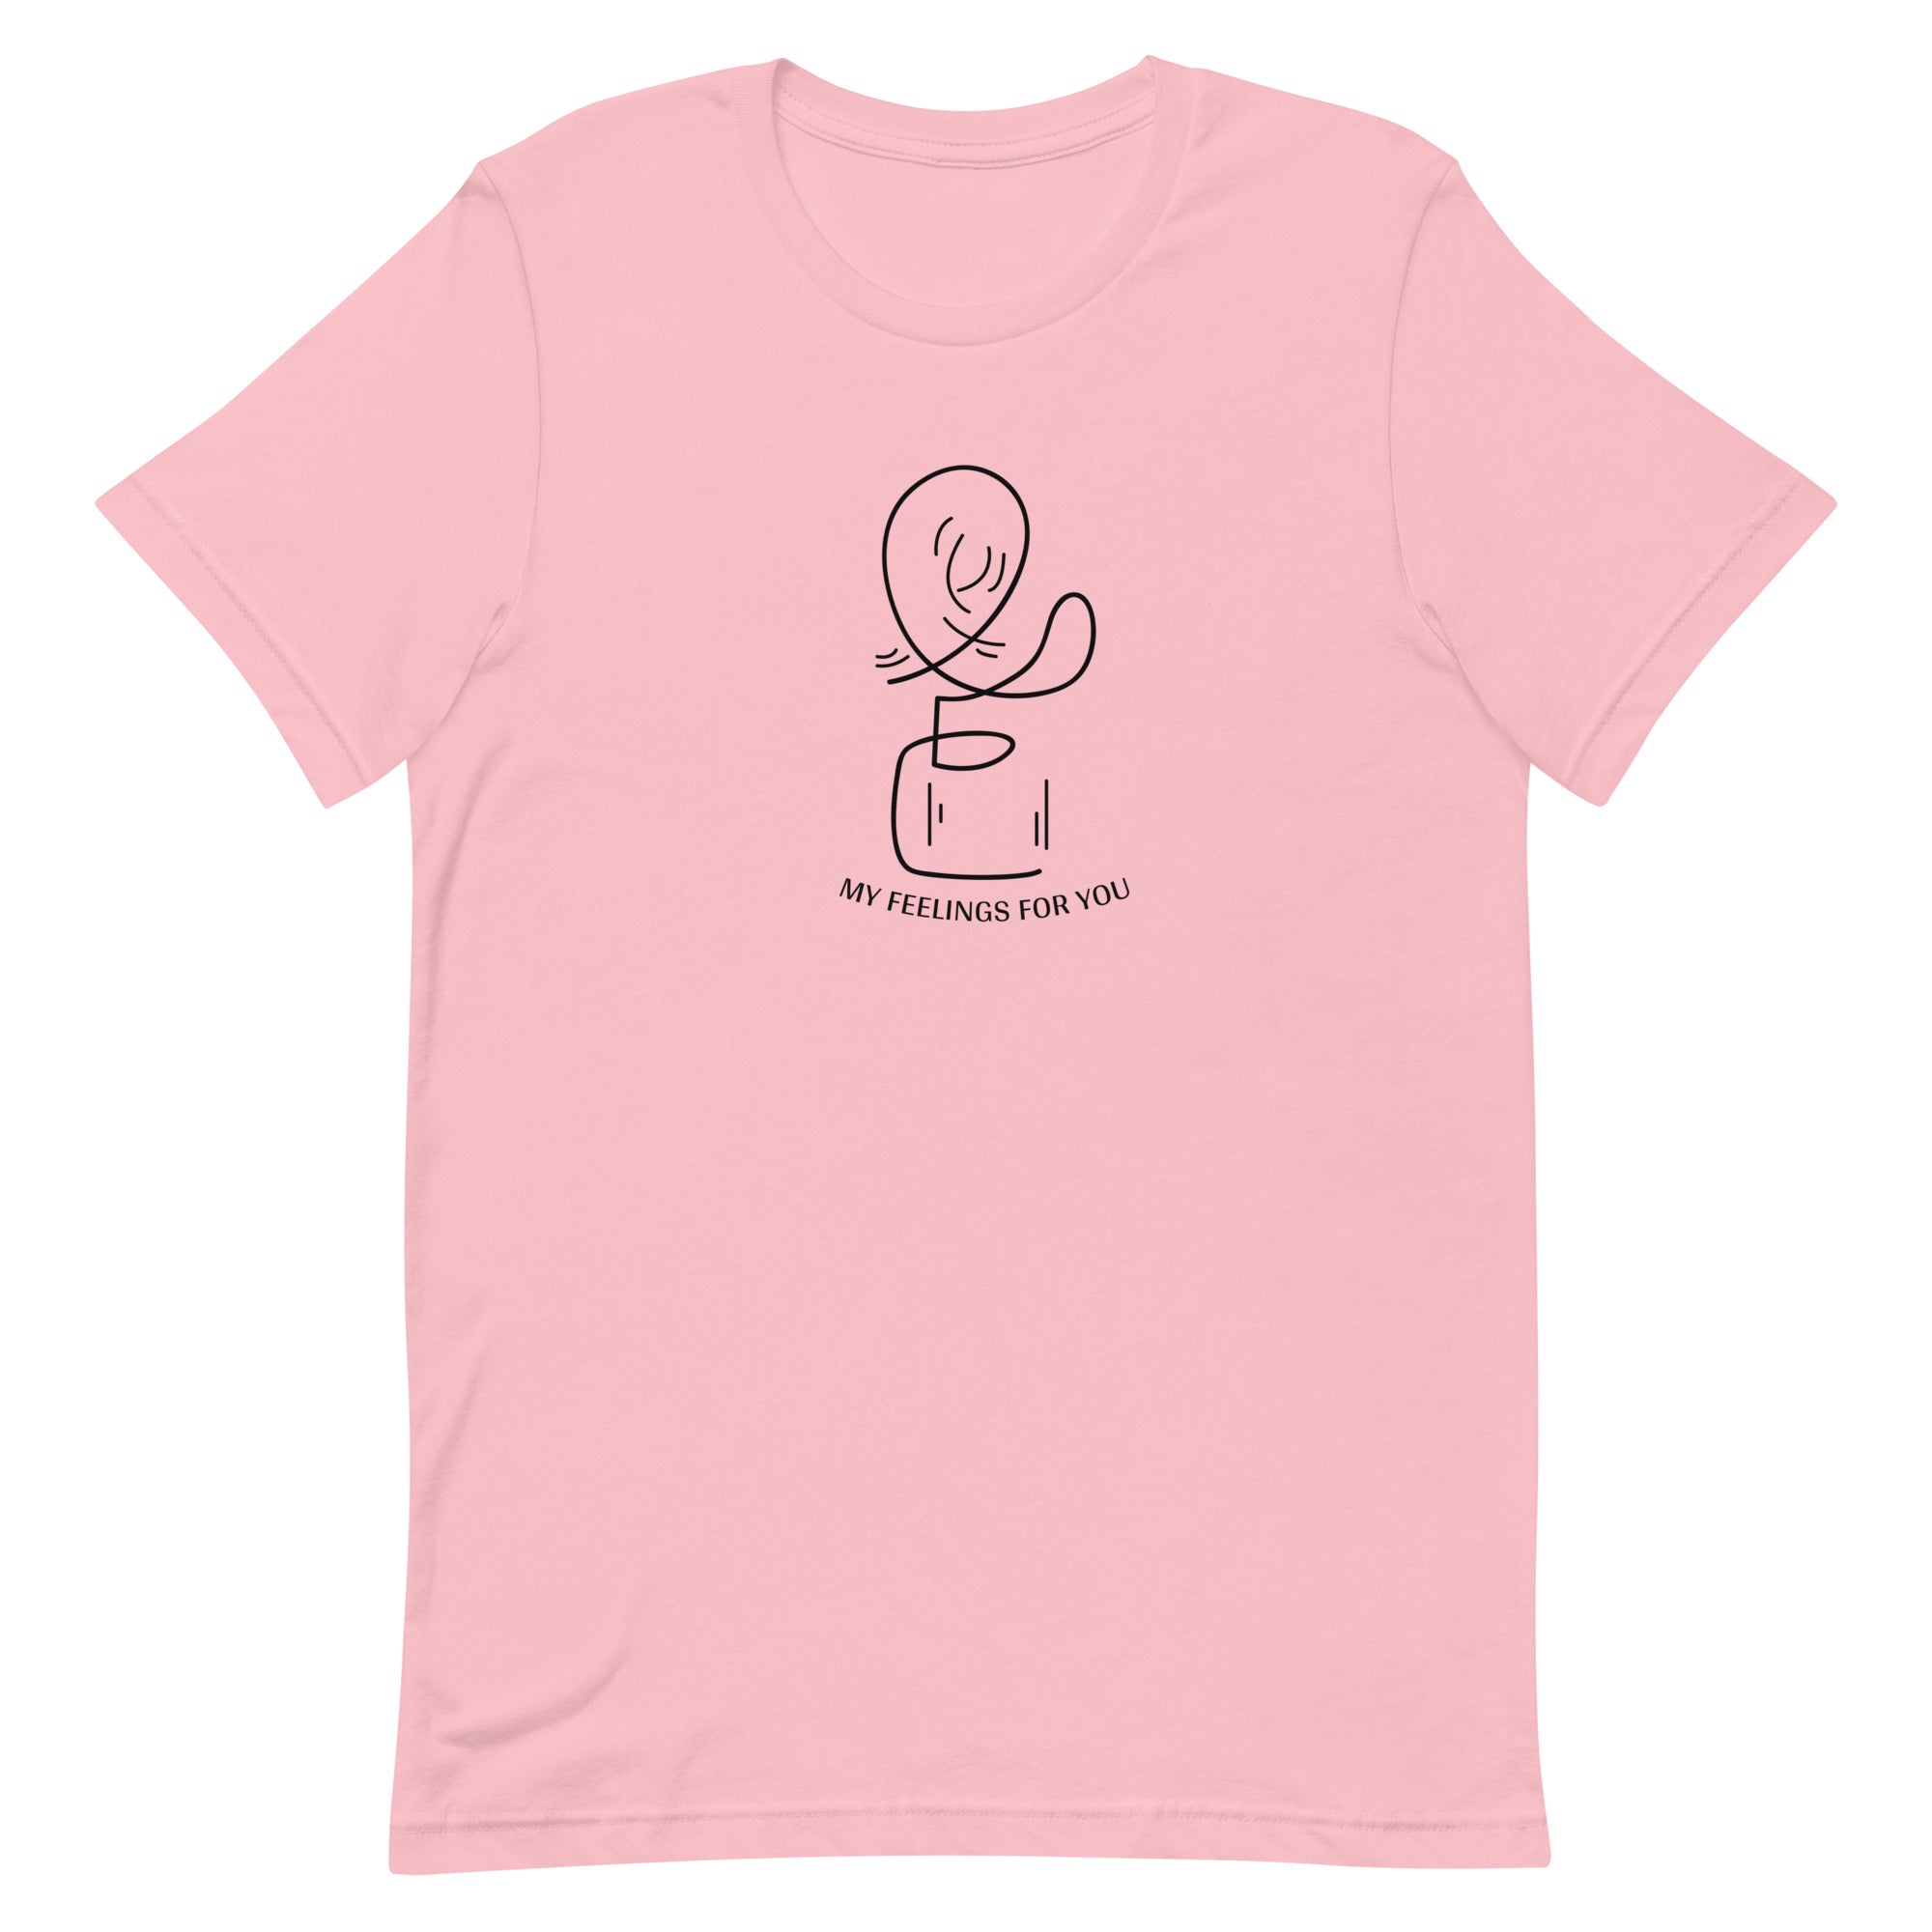 Leah's Feelings | Short-Sleeve Unisex T-Shirt | Stardew Valley Threads and Thistles Inventory Pink S 